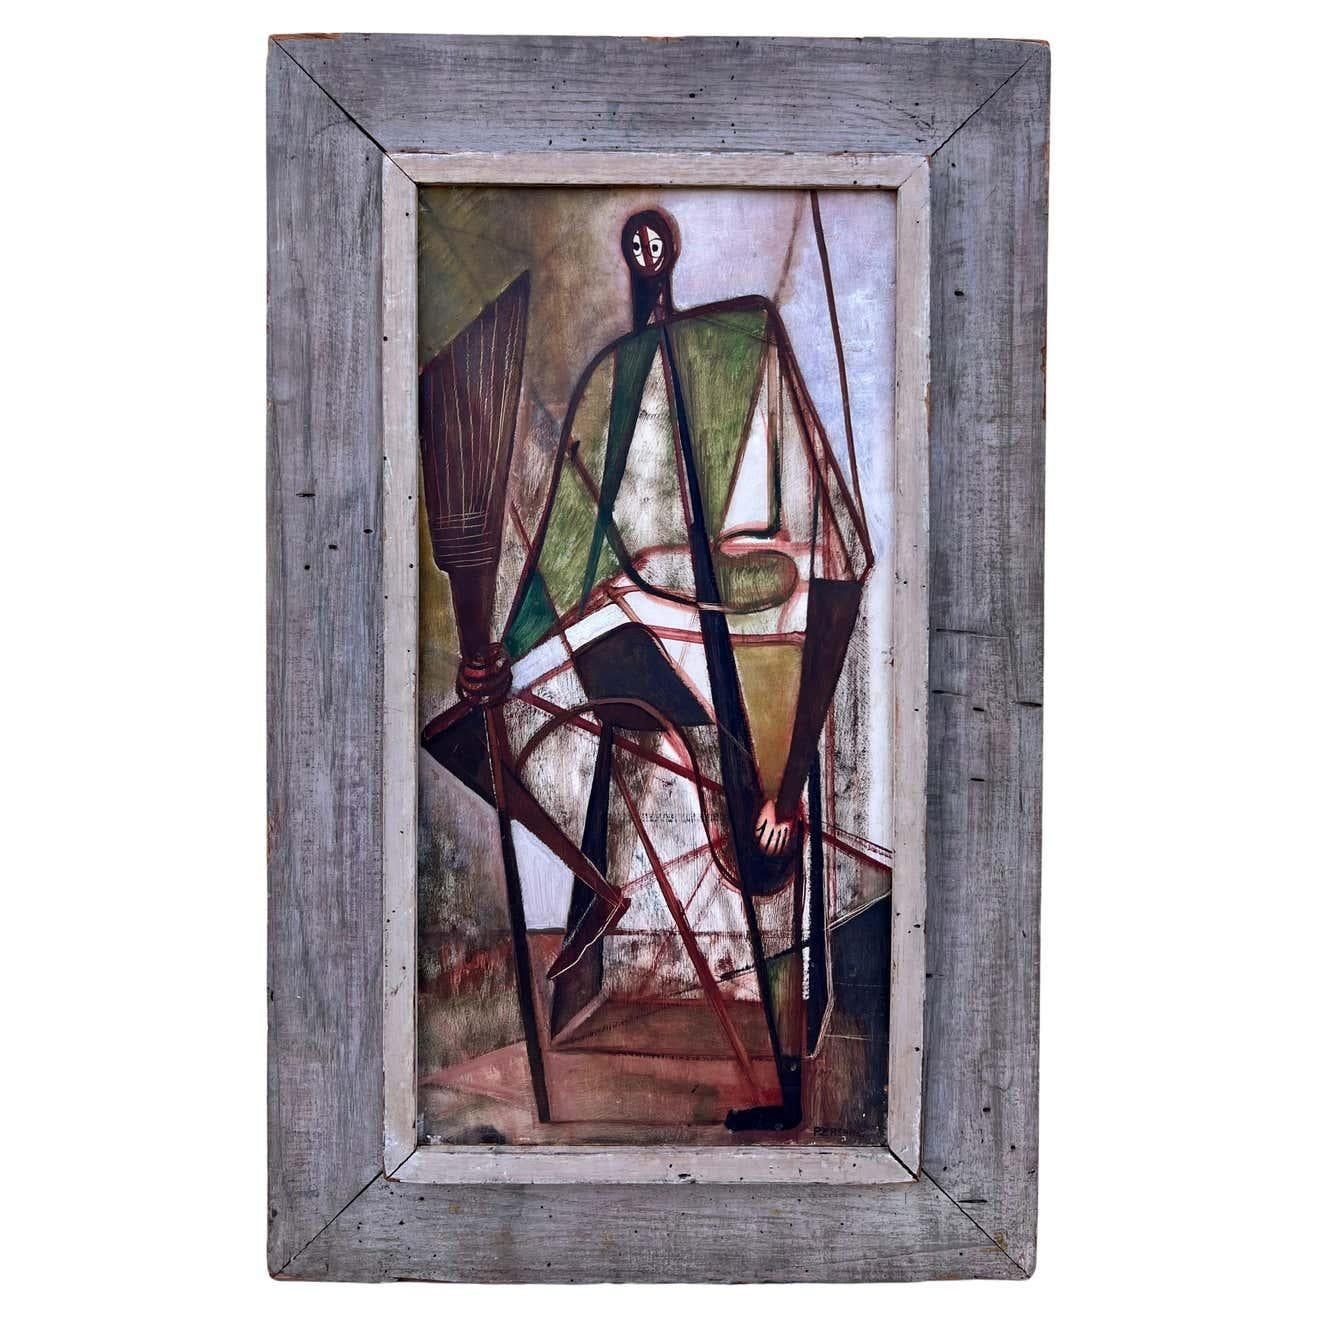 Louise Pershing Figurative Painting - Cubist Figure with Broom